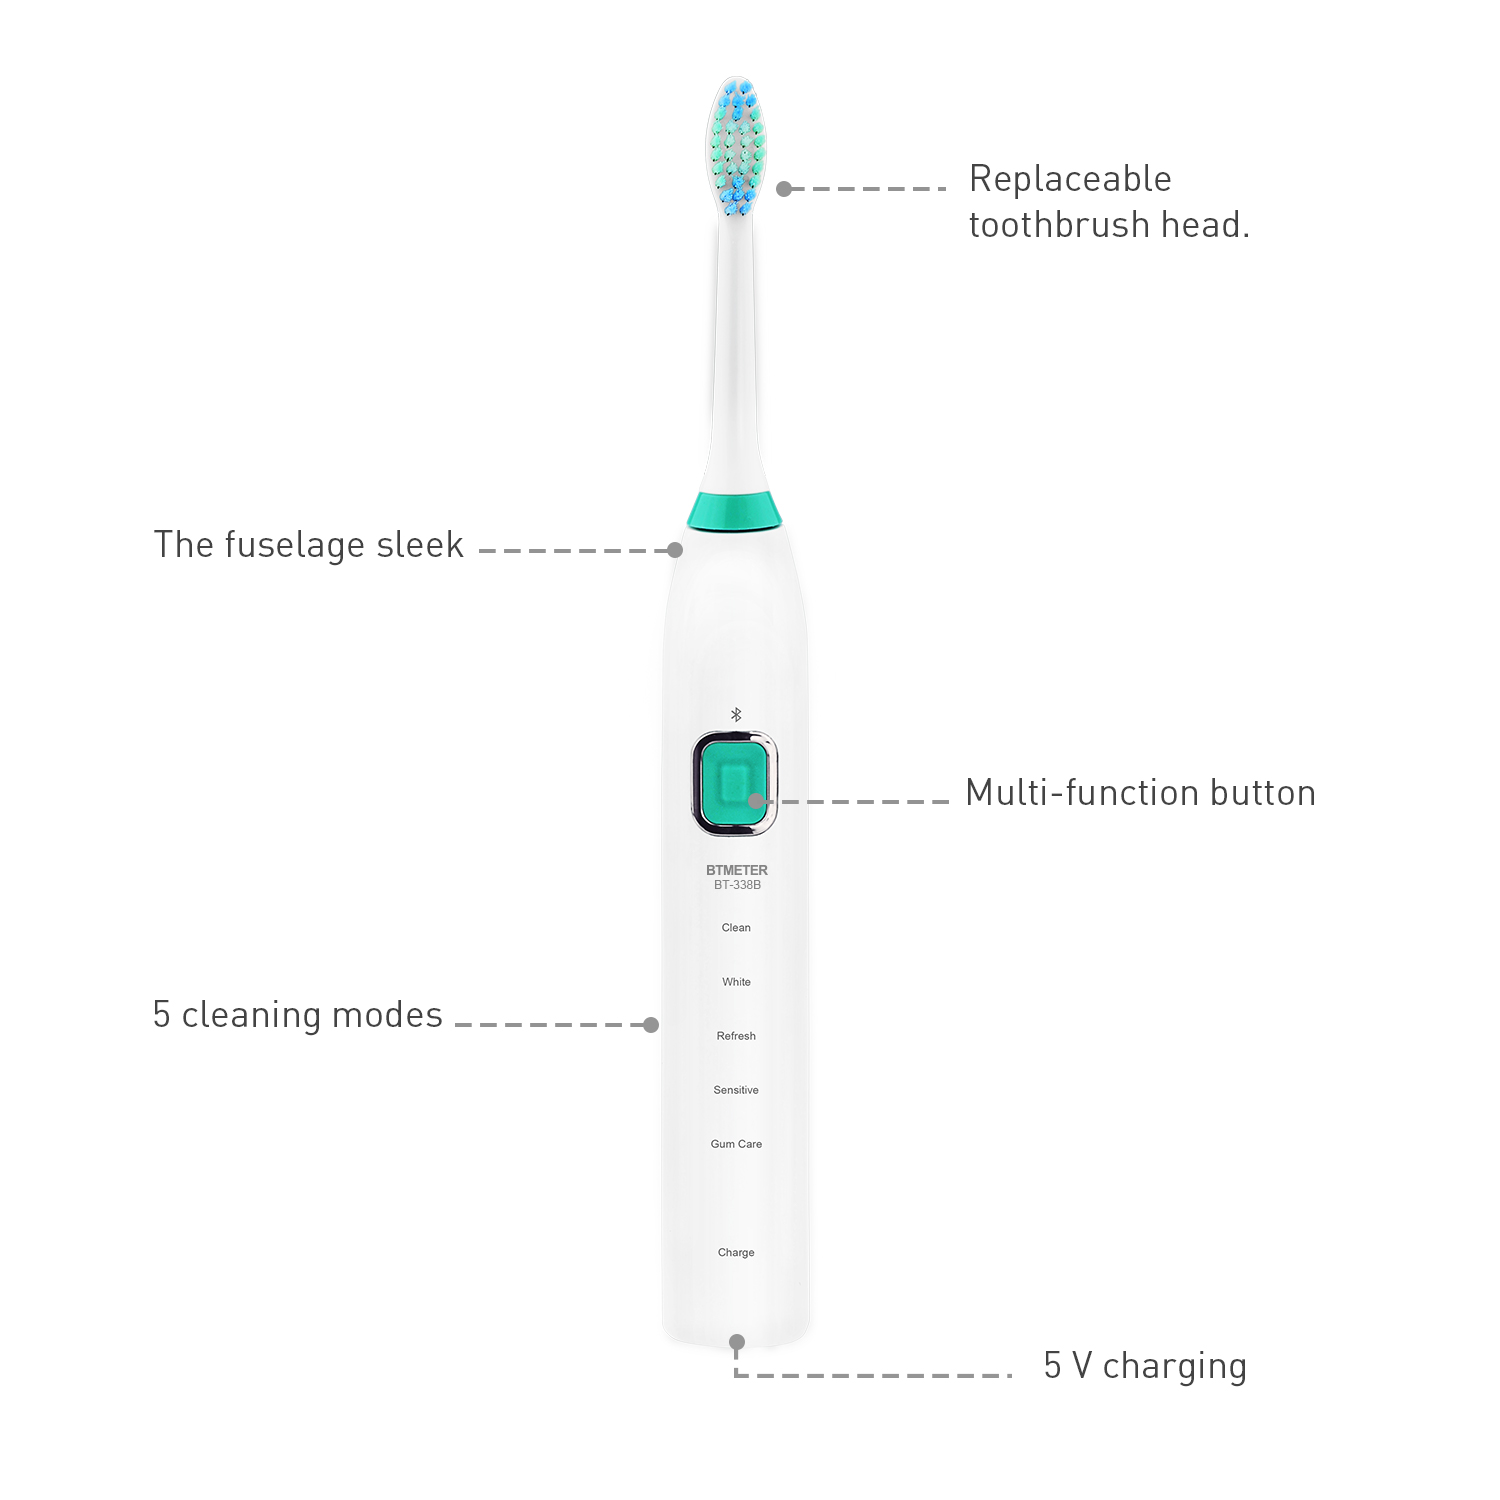 HoldPeak new arrival buy automatic toothbrush for business for man